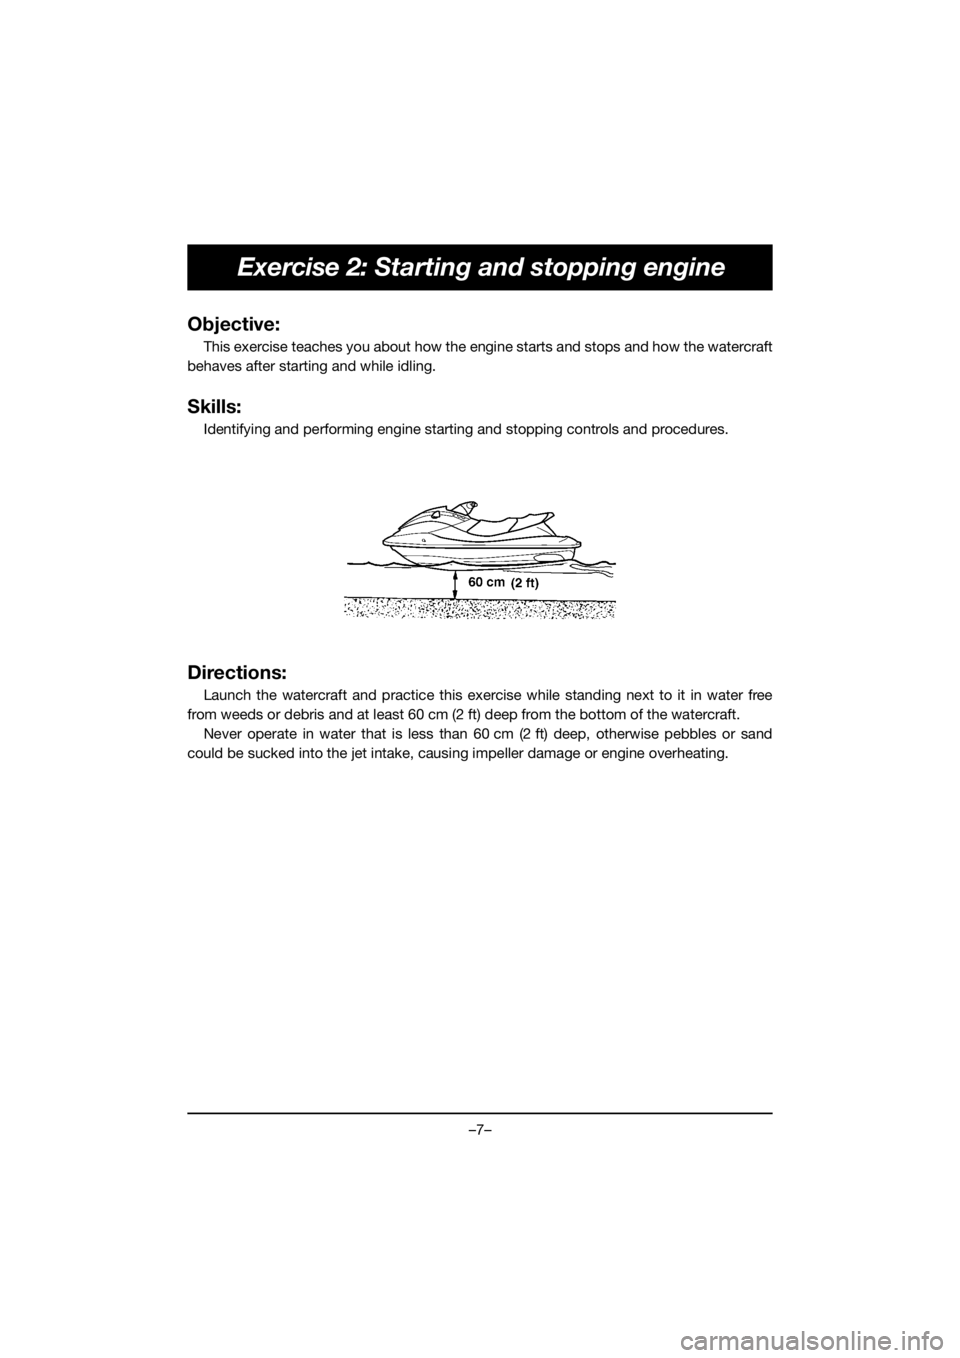 YAMAHA EX 2019  ΟΔΗΓΌΣ ΧΡΉΣΗΣ (in Greek) –7–
Exercise 2: Starting and stopping engine
Objective:
This exercise teaches you about how the engine starts and stops and how the watercraft
behaves after starting and while idling.
Skills:
Iden